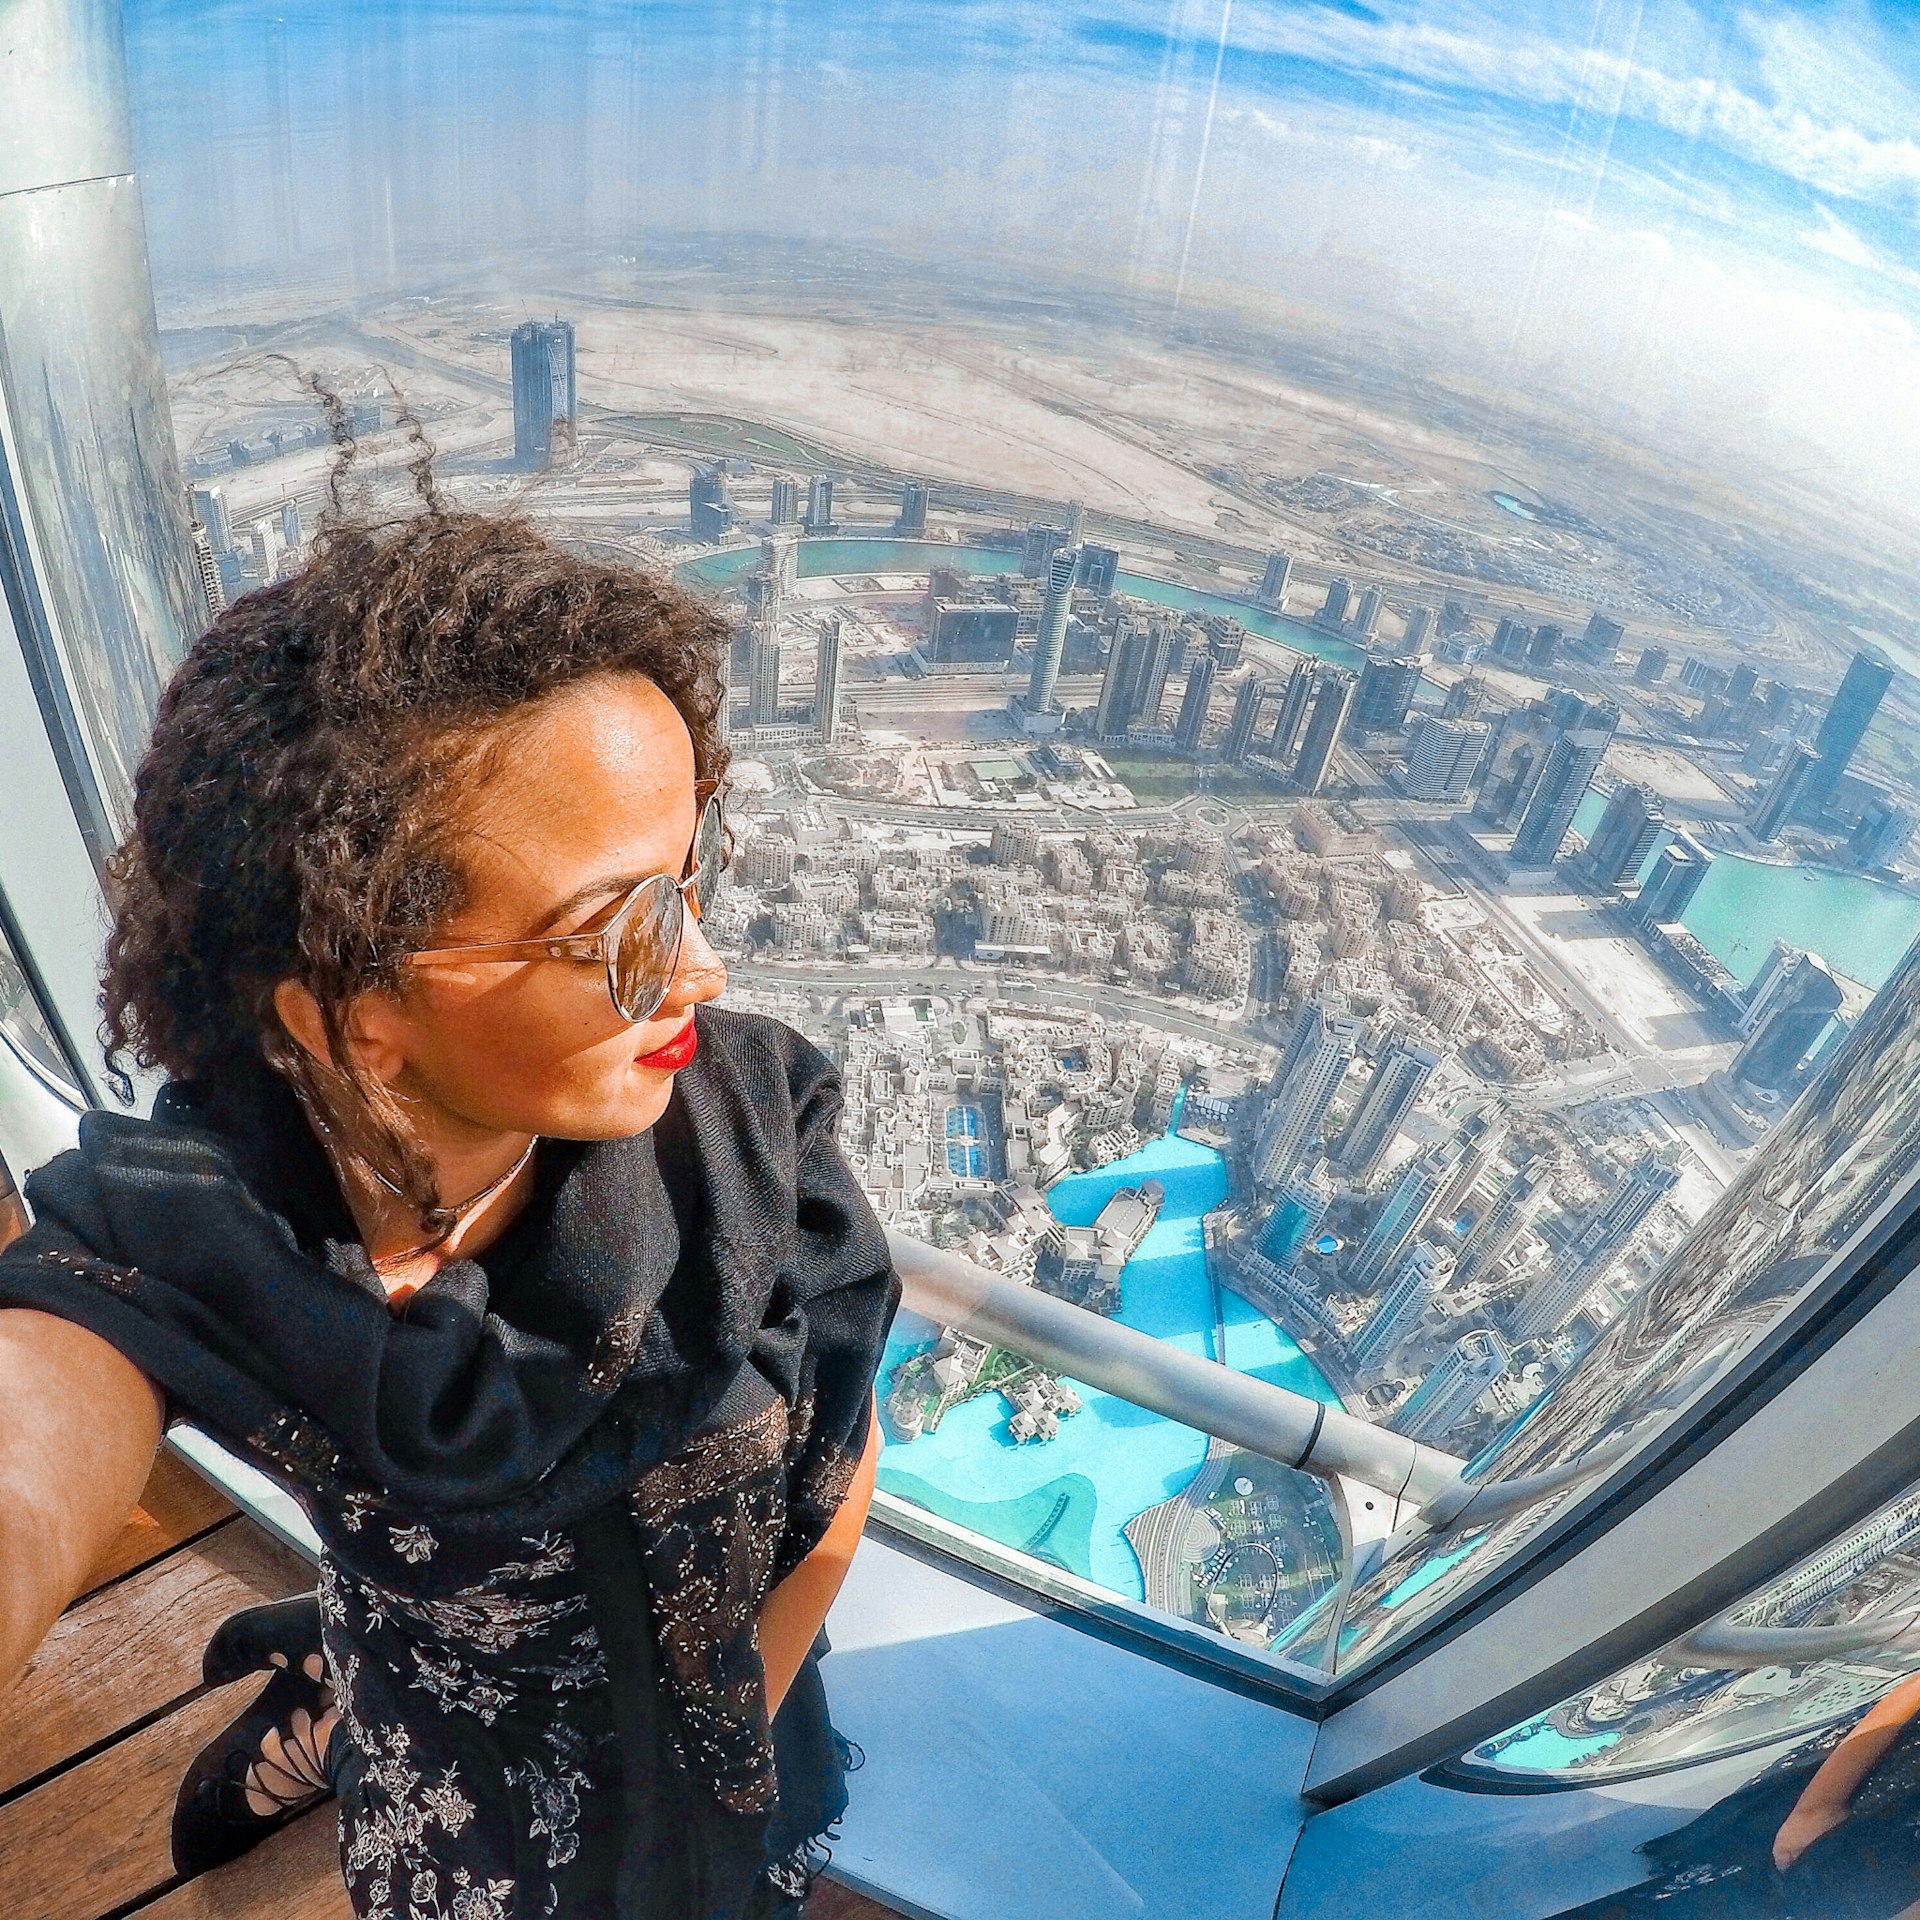 A black woman taking a selfie on a skyscraper at an angle that gives a sense of its vast height